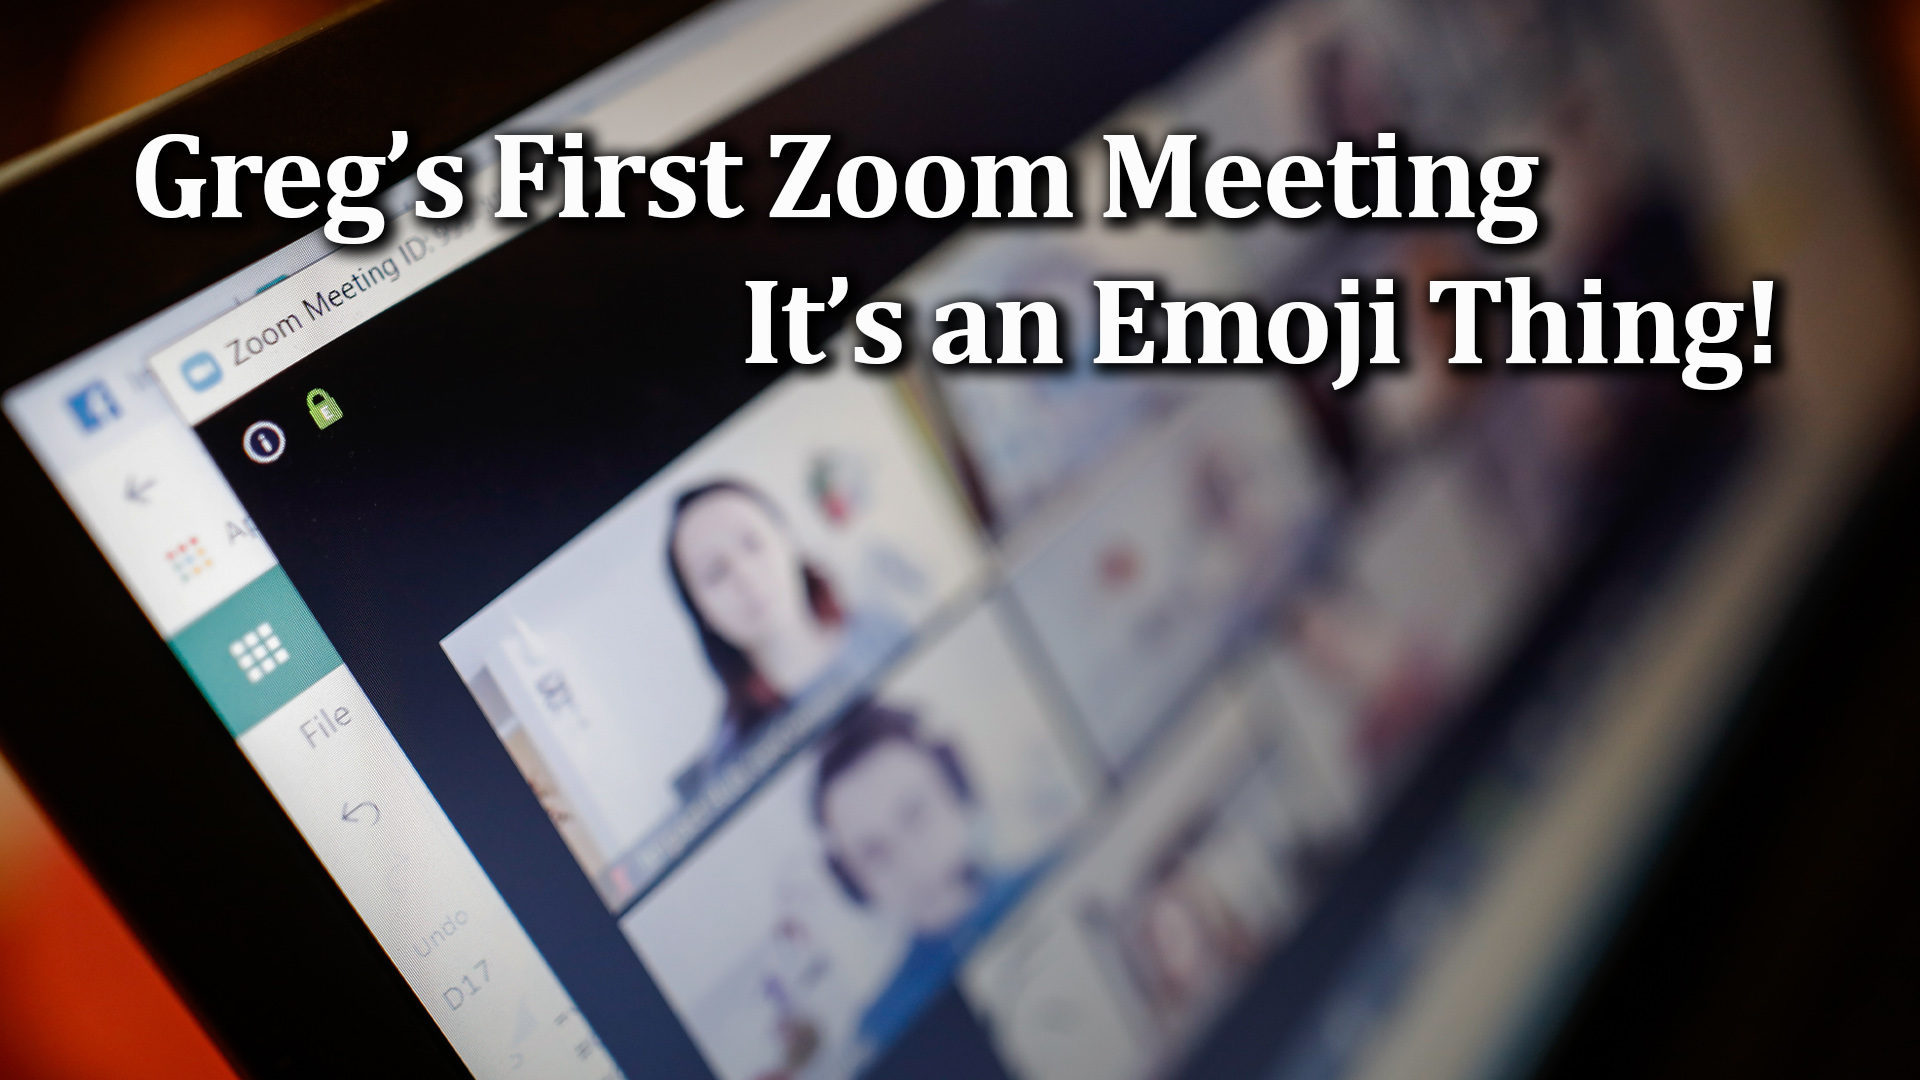 02-15-22 Gregs First Zoom Meeting its a Emoji Thing